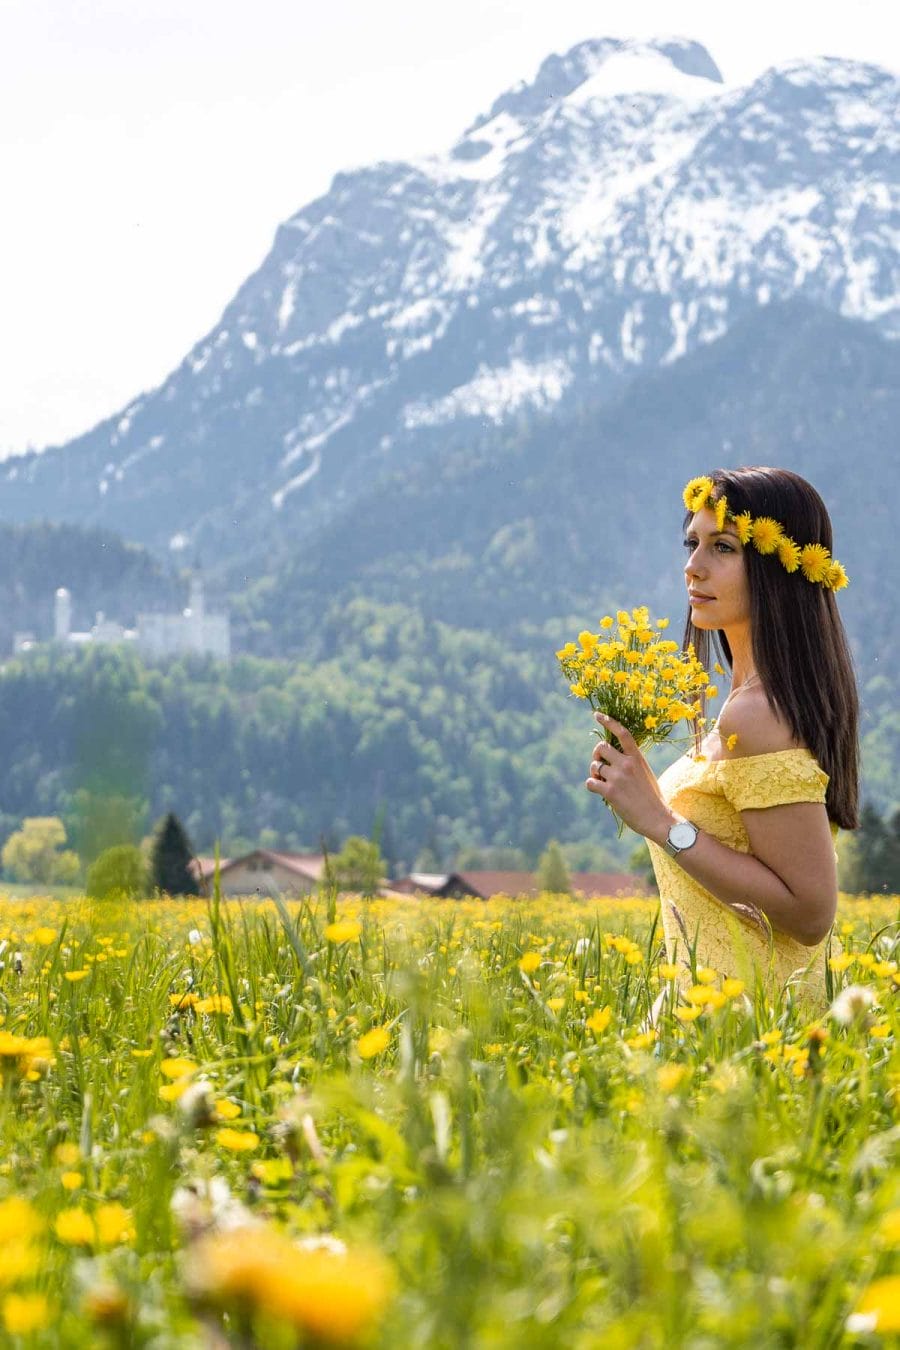 Girl in a flower crown sitting in a daffodil field with the Neuschwanstein Castle in the background